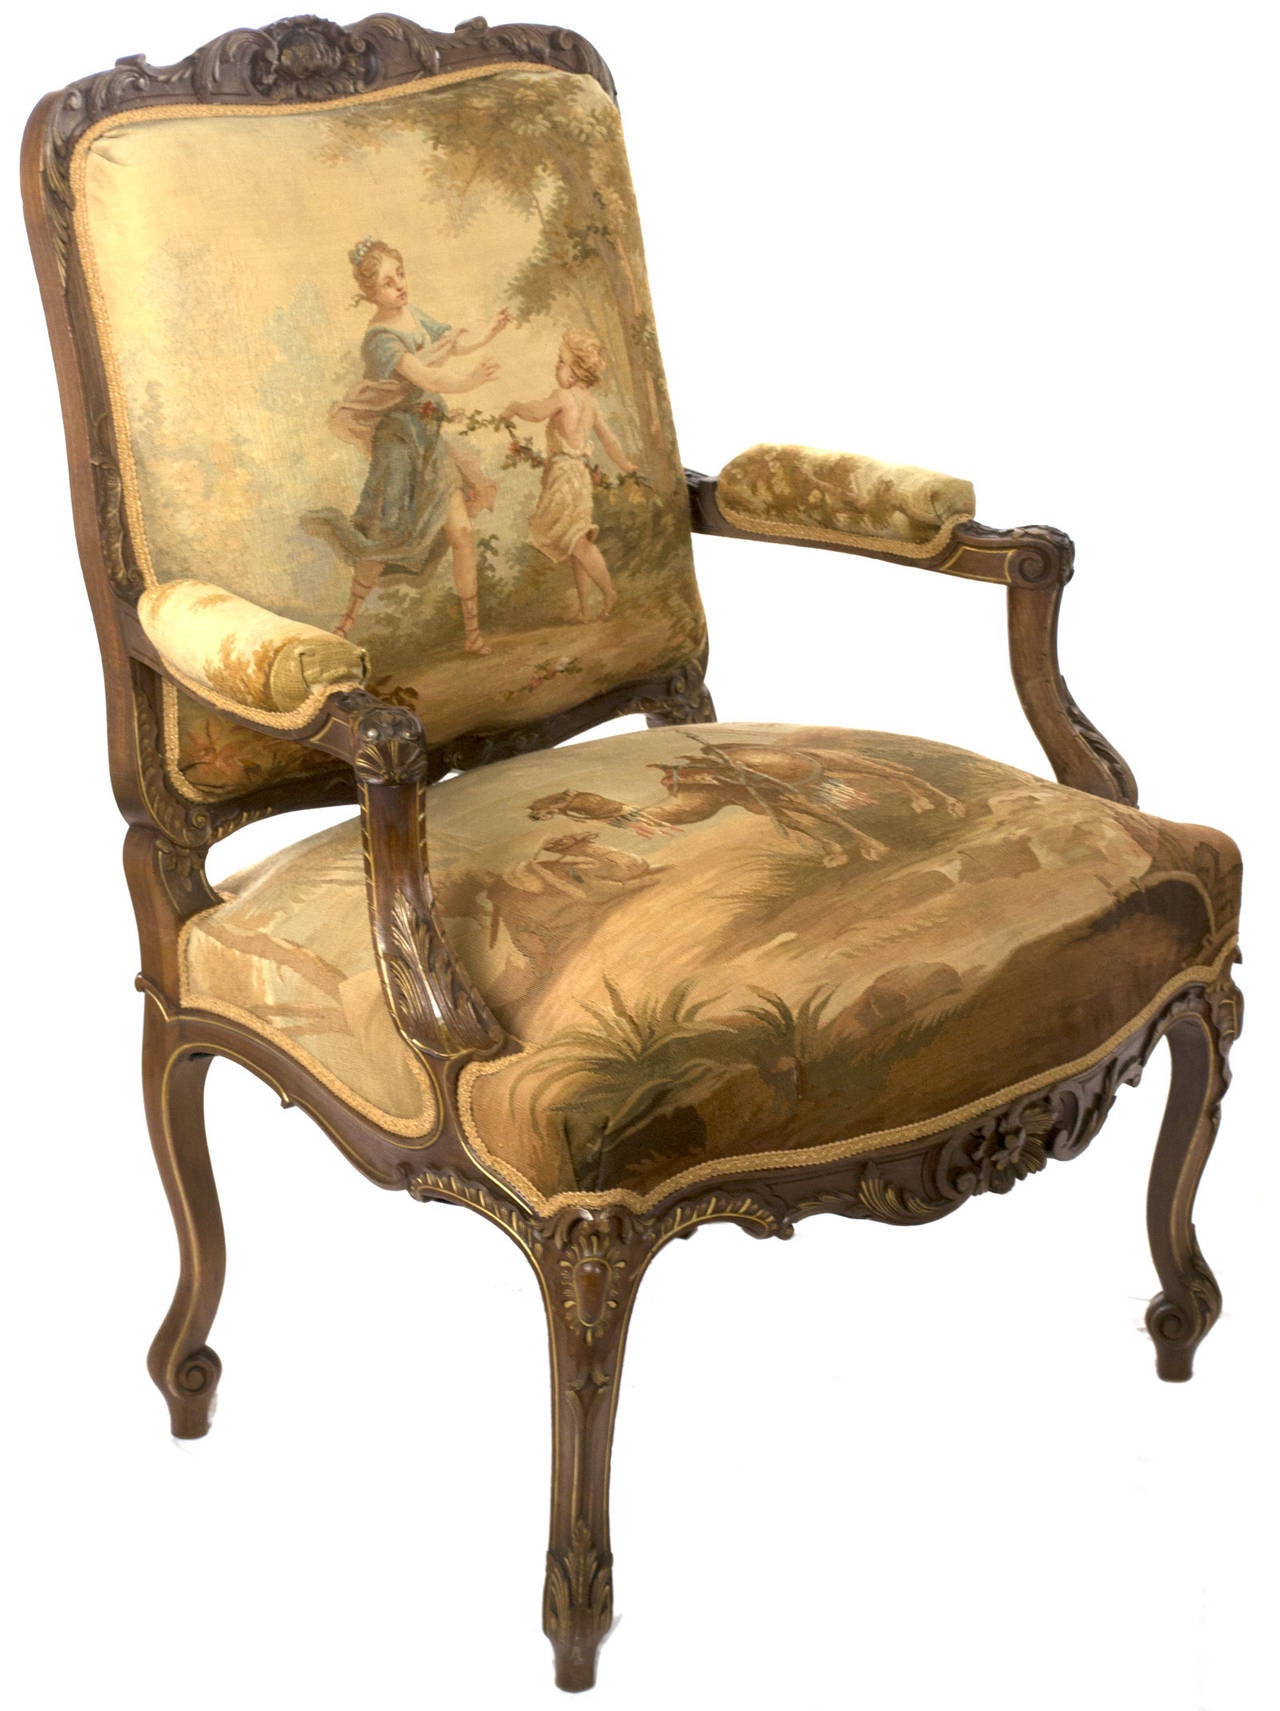 Two very fine Louis XV-style chairs of carved and parcel gilt walnut, upholstered in petit- and gros-point needlework in bright colors depicting scenes and country life, including one unusual chair with an exotic camel.
Date: c. 1870
Dimensions: